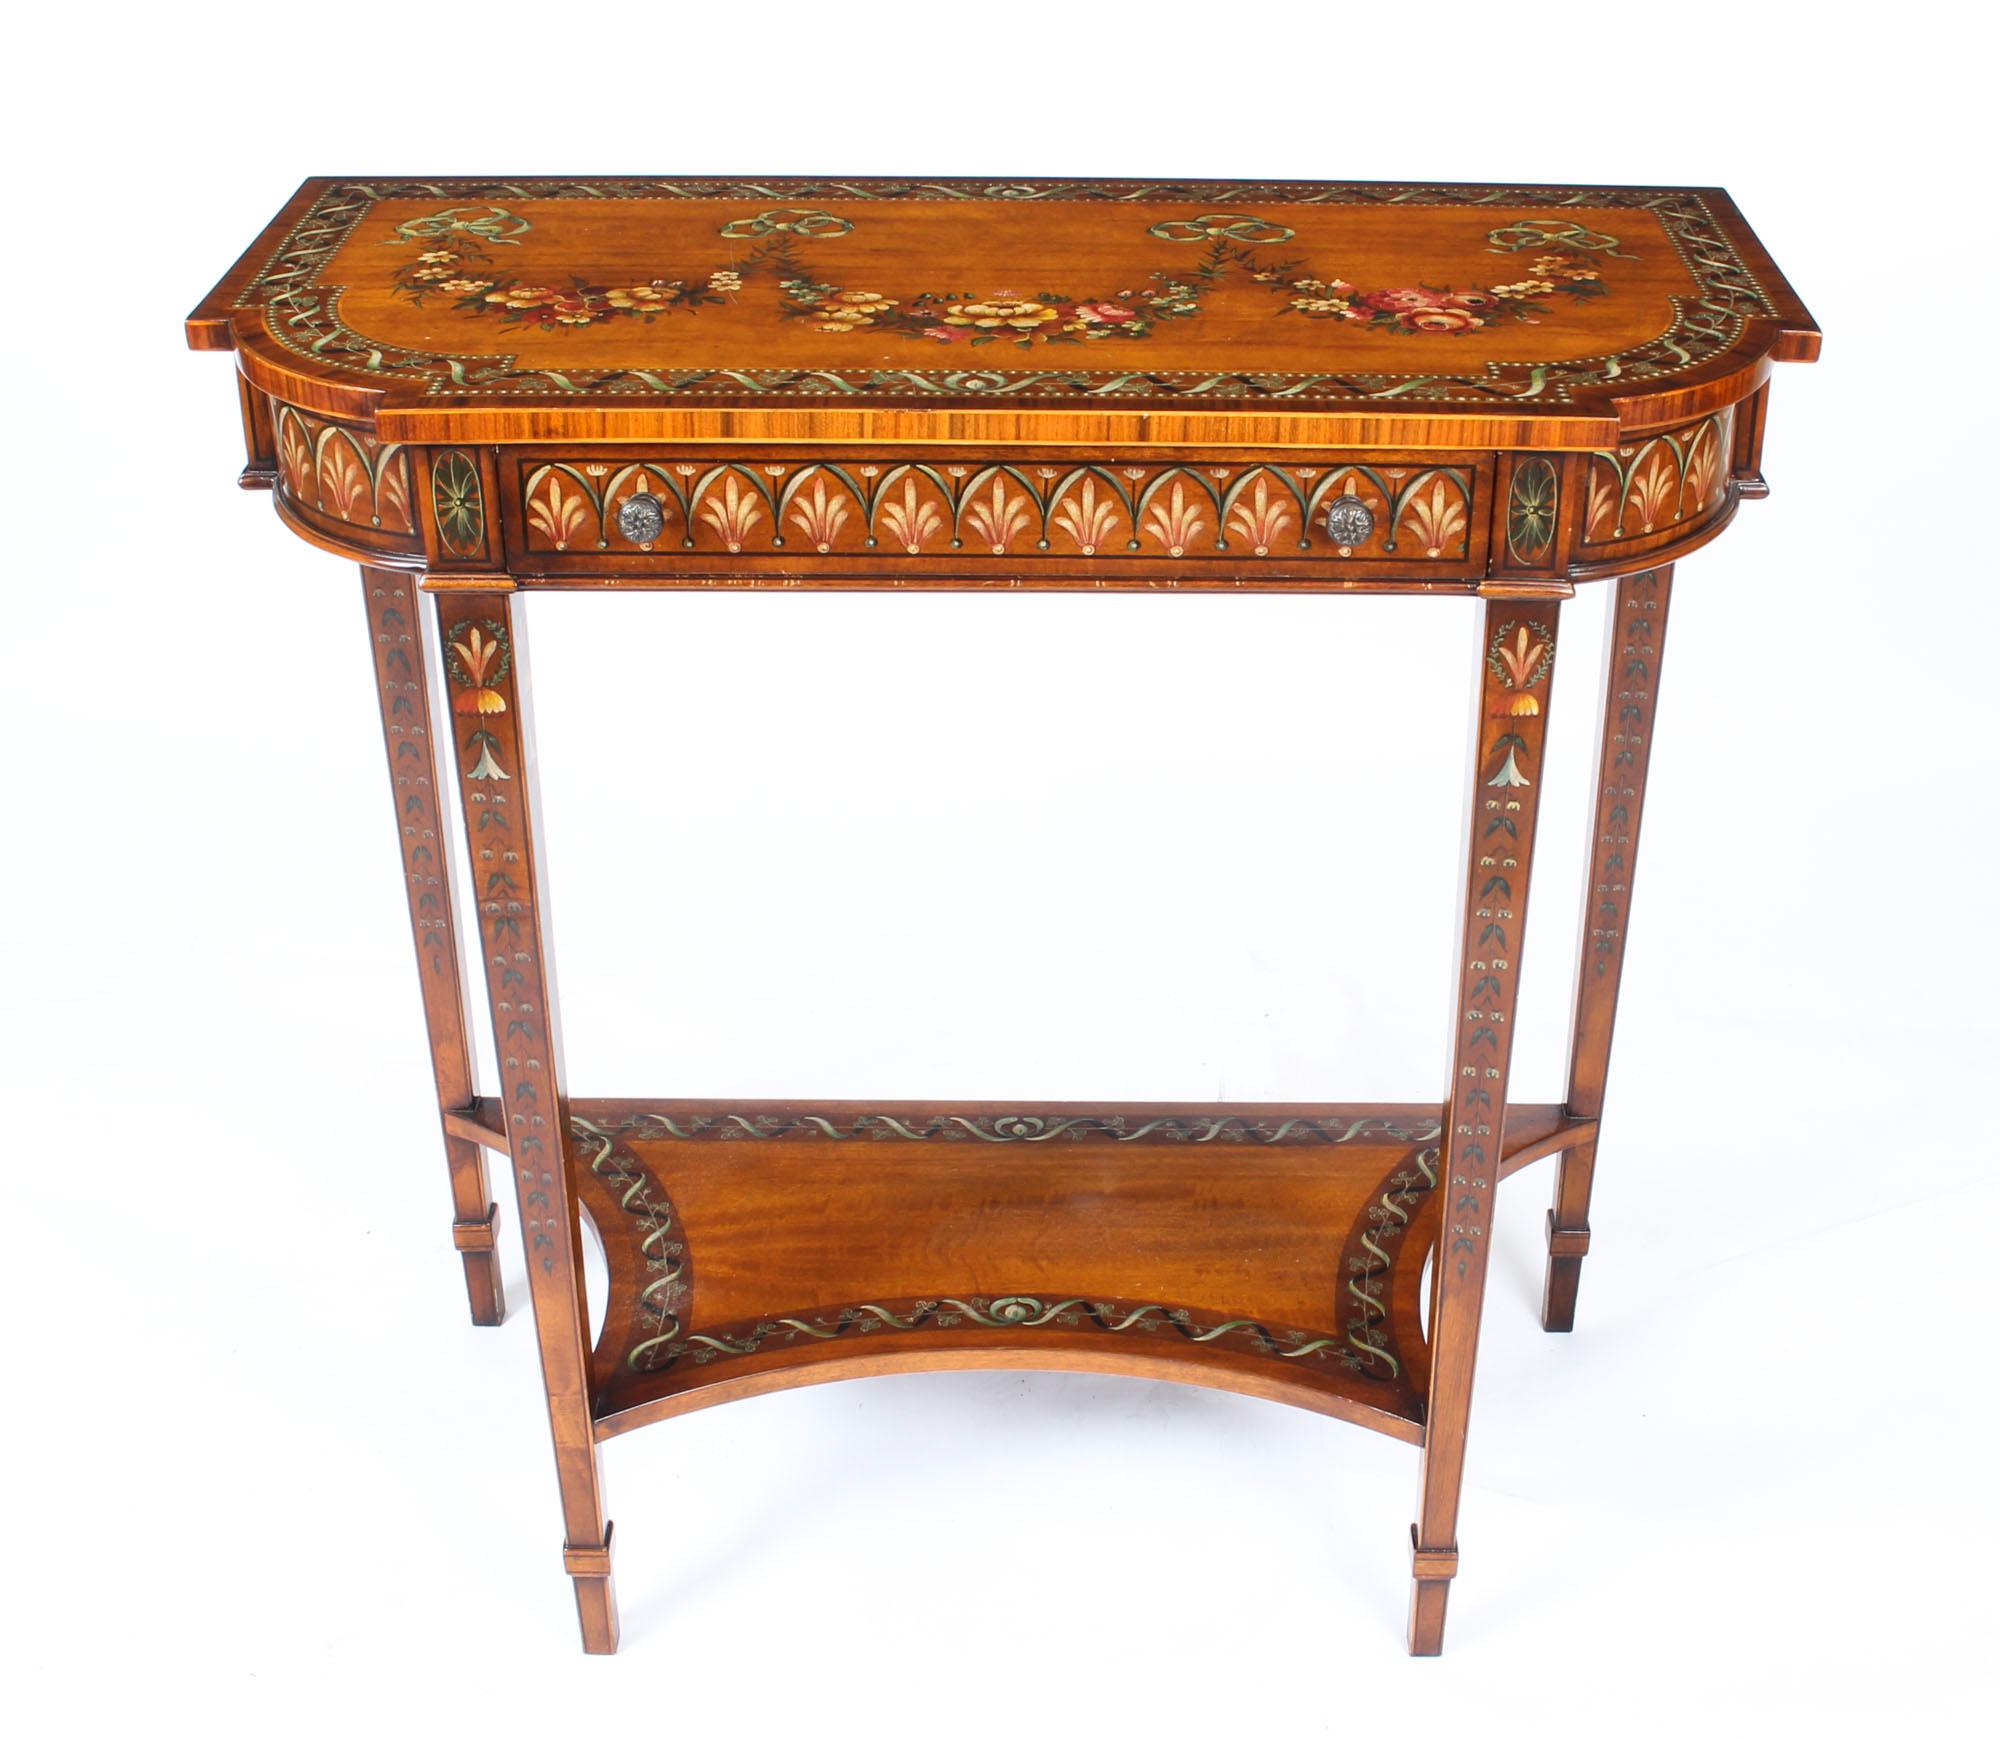 This is a truly magnificent George III style hand-painted satinwood console table, by one of the UKs leading manufacturers of fine furniture, Theodore Alexander, dating from the late 20th Century.

This remarkable console table is made from the